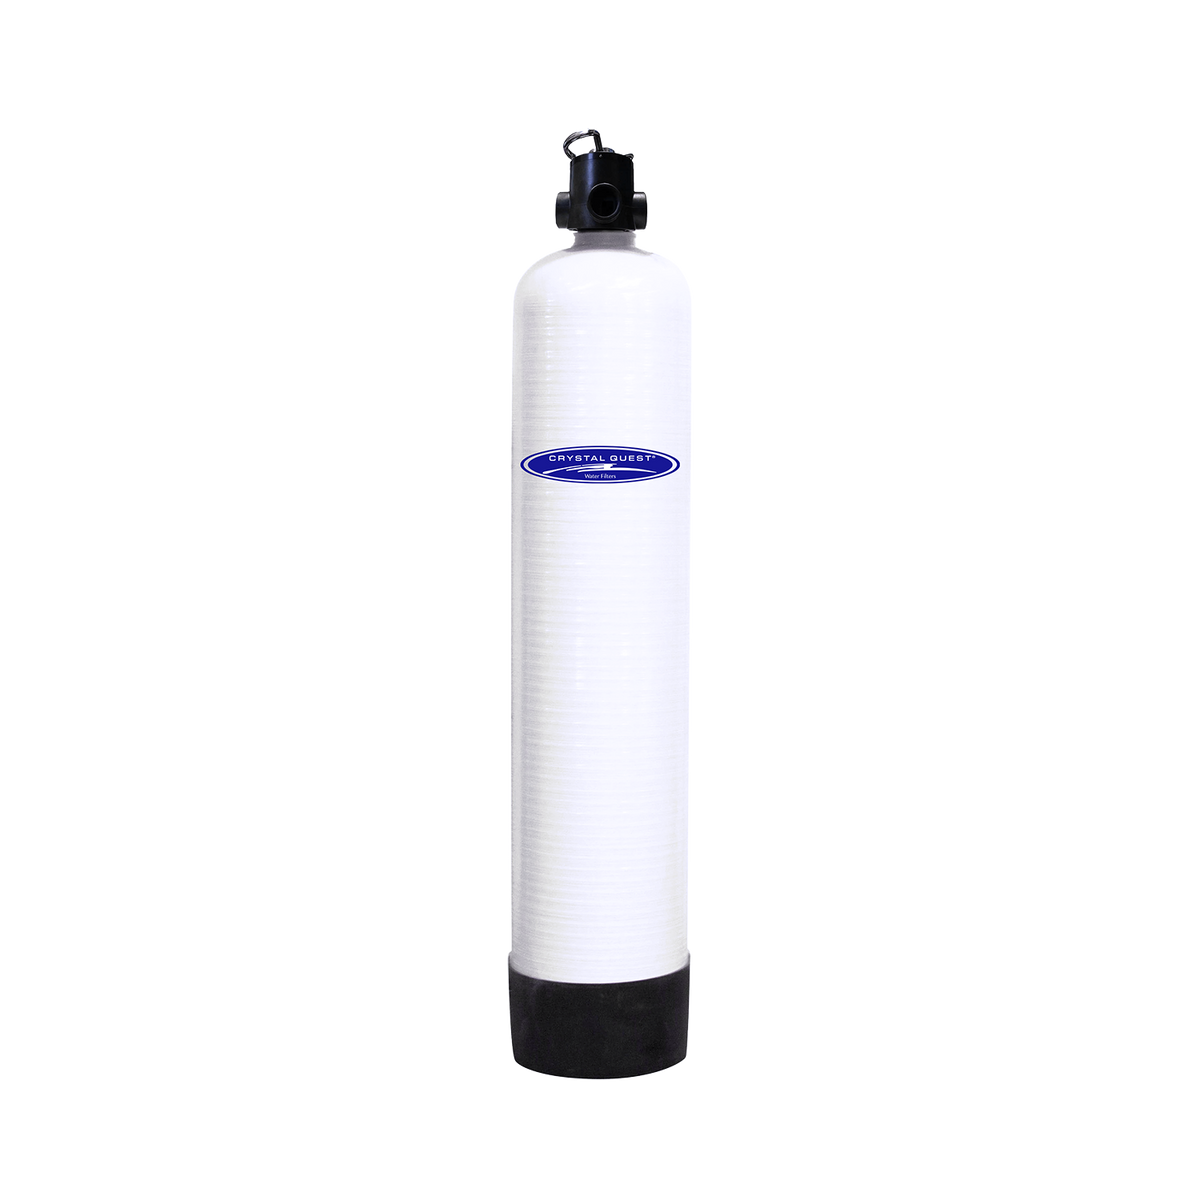 15 GPM / Manual (Downflow w/ Backwash) Demineralizing (DI) Water Filtration System - Commercial - Crystal Quest